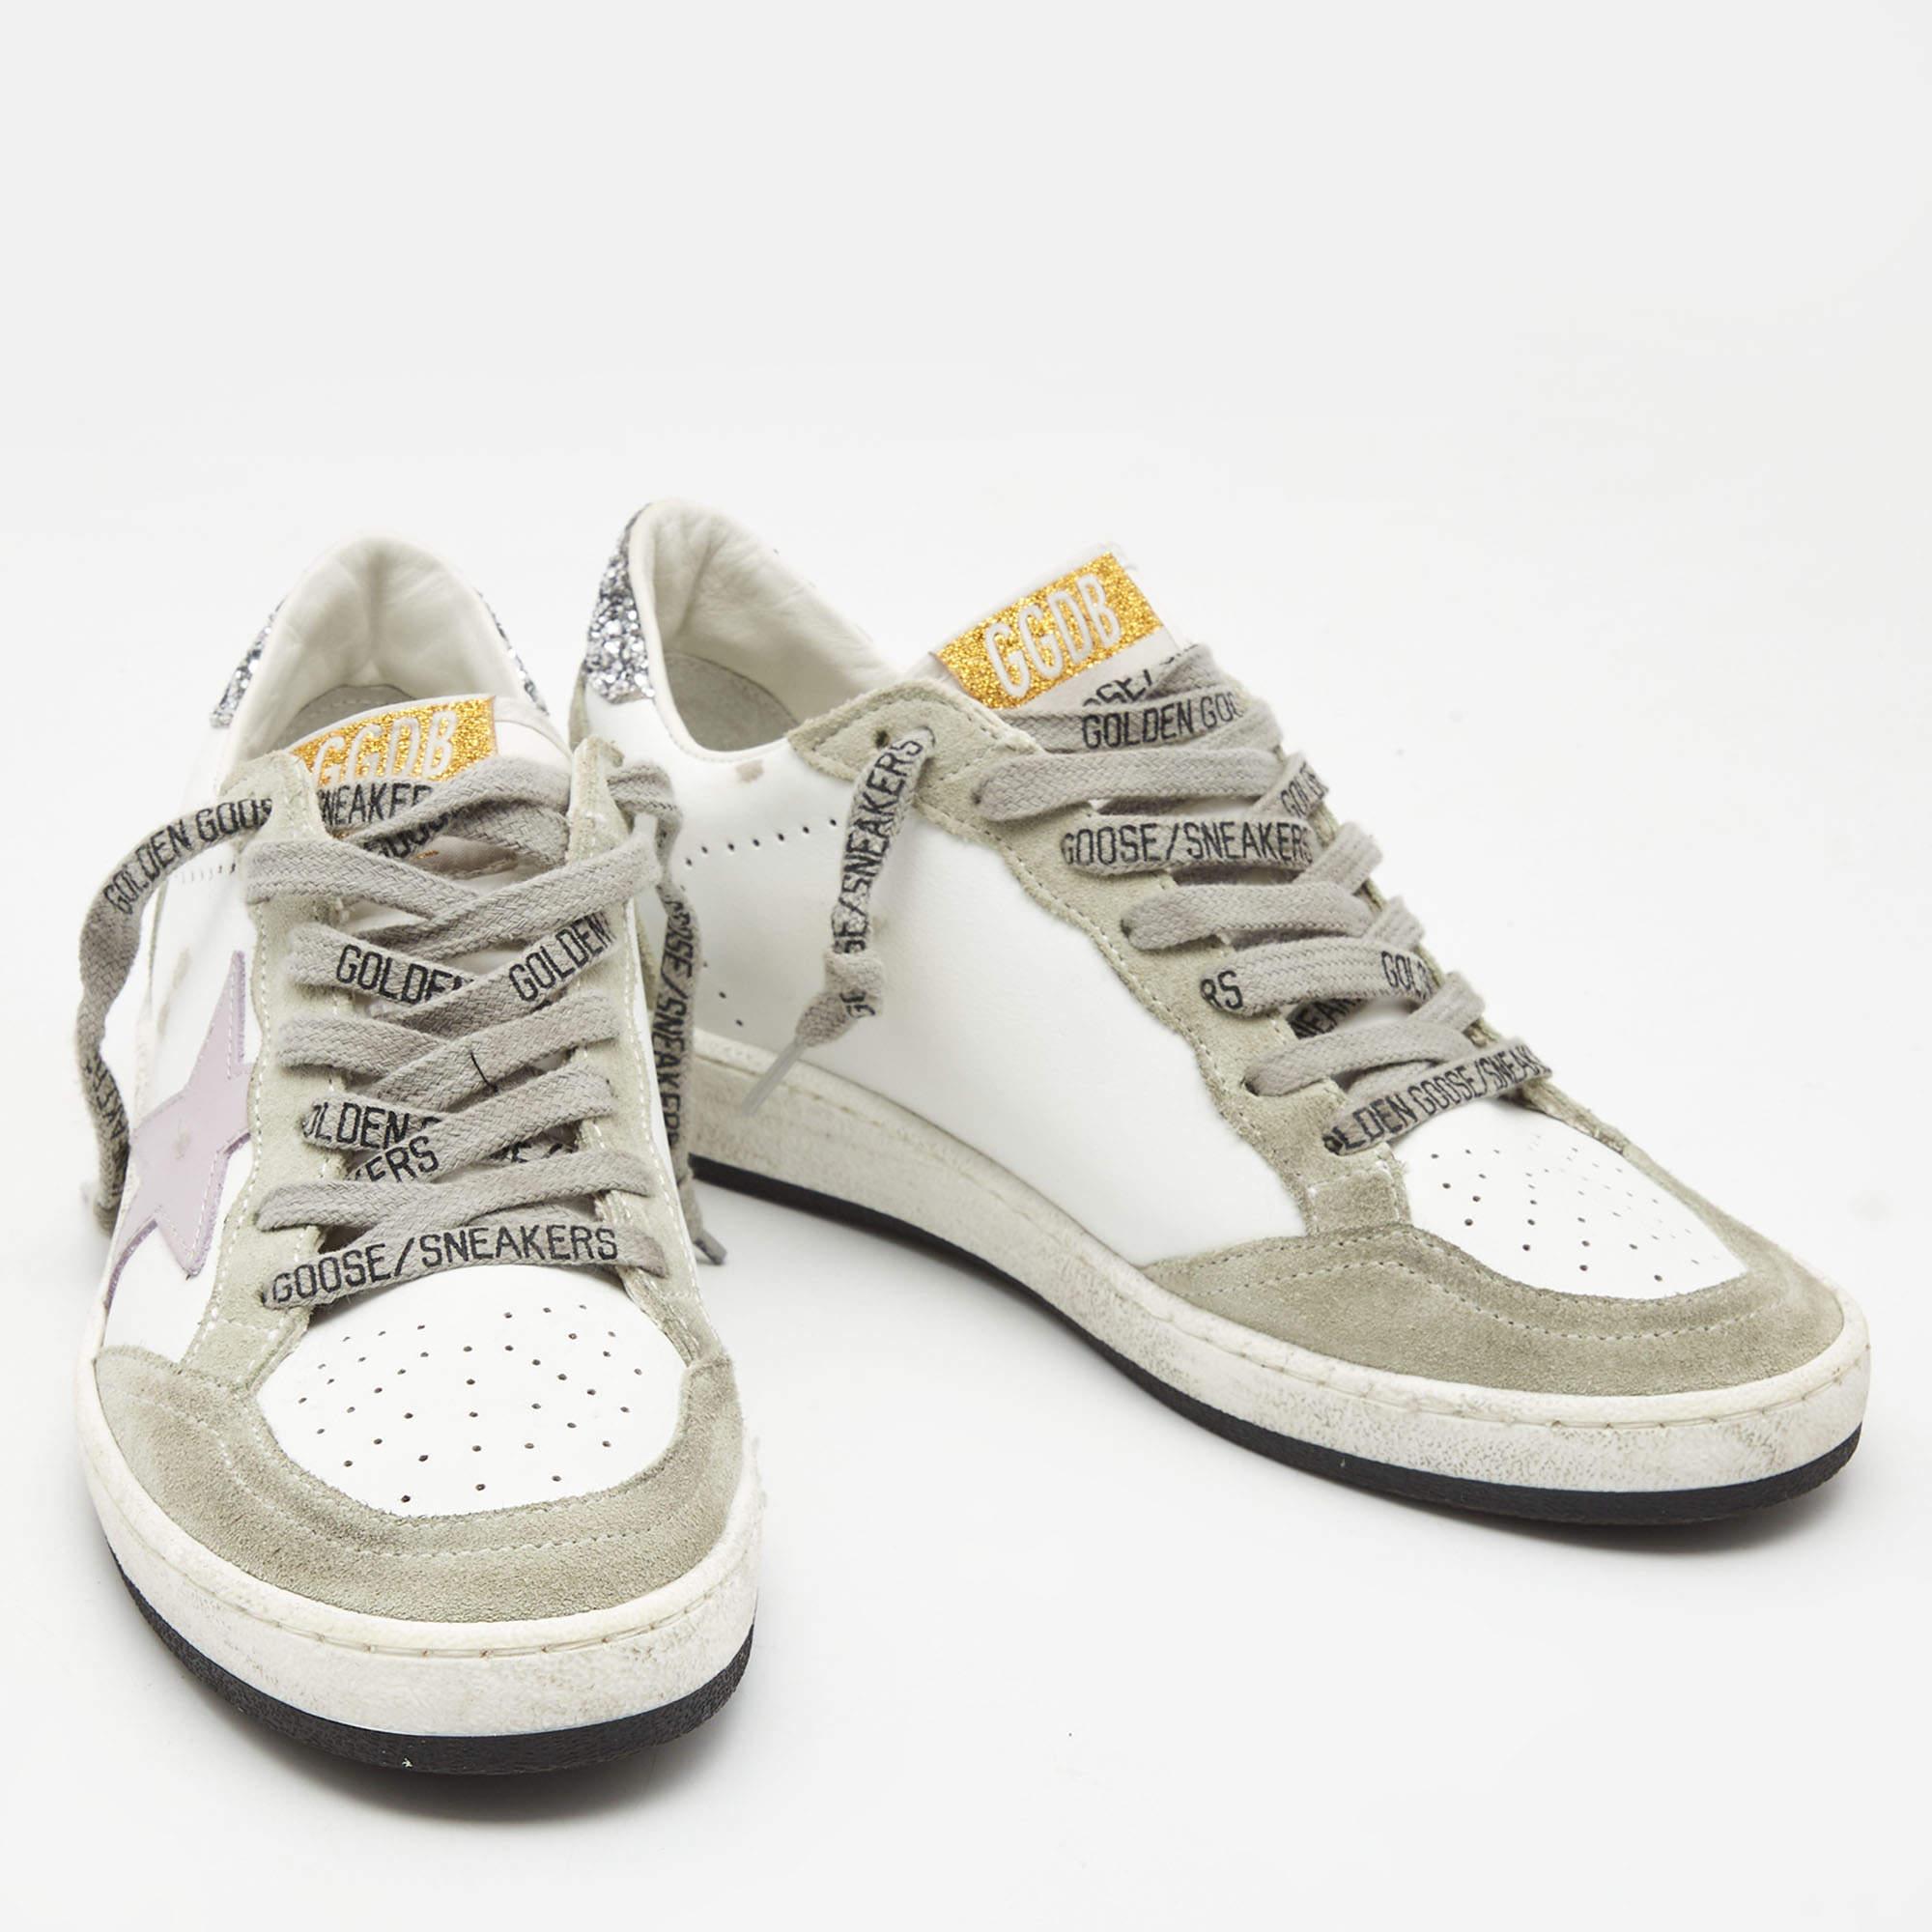 Golden Goose White/Grey Leather and Suede Ballstar Low Top Sneakers Size 37 1